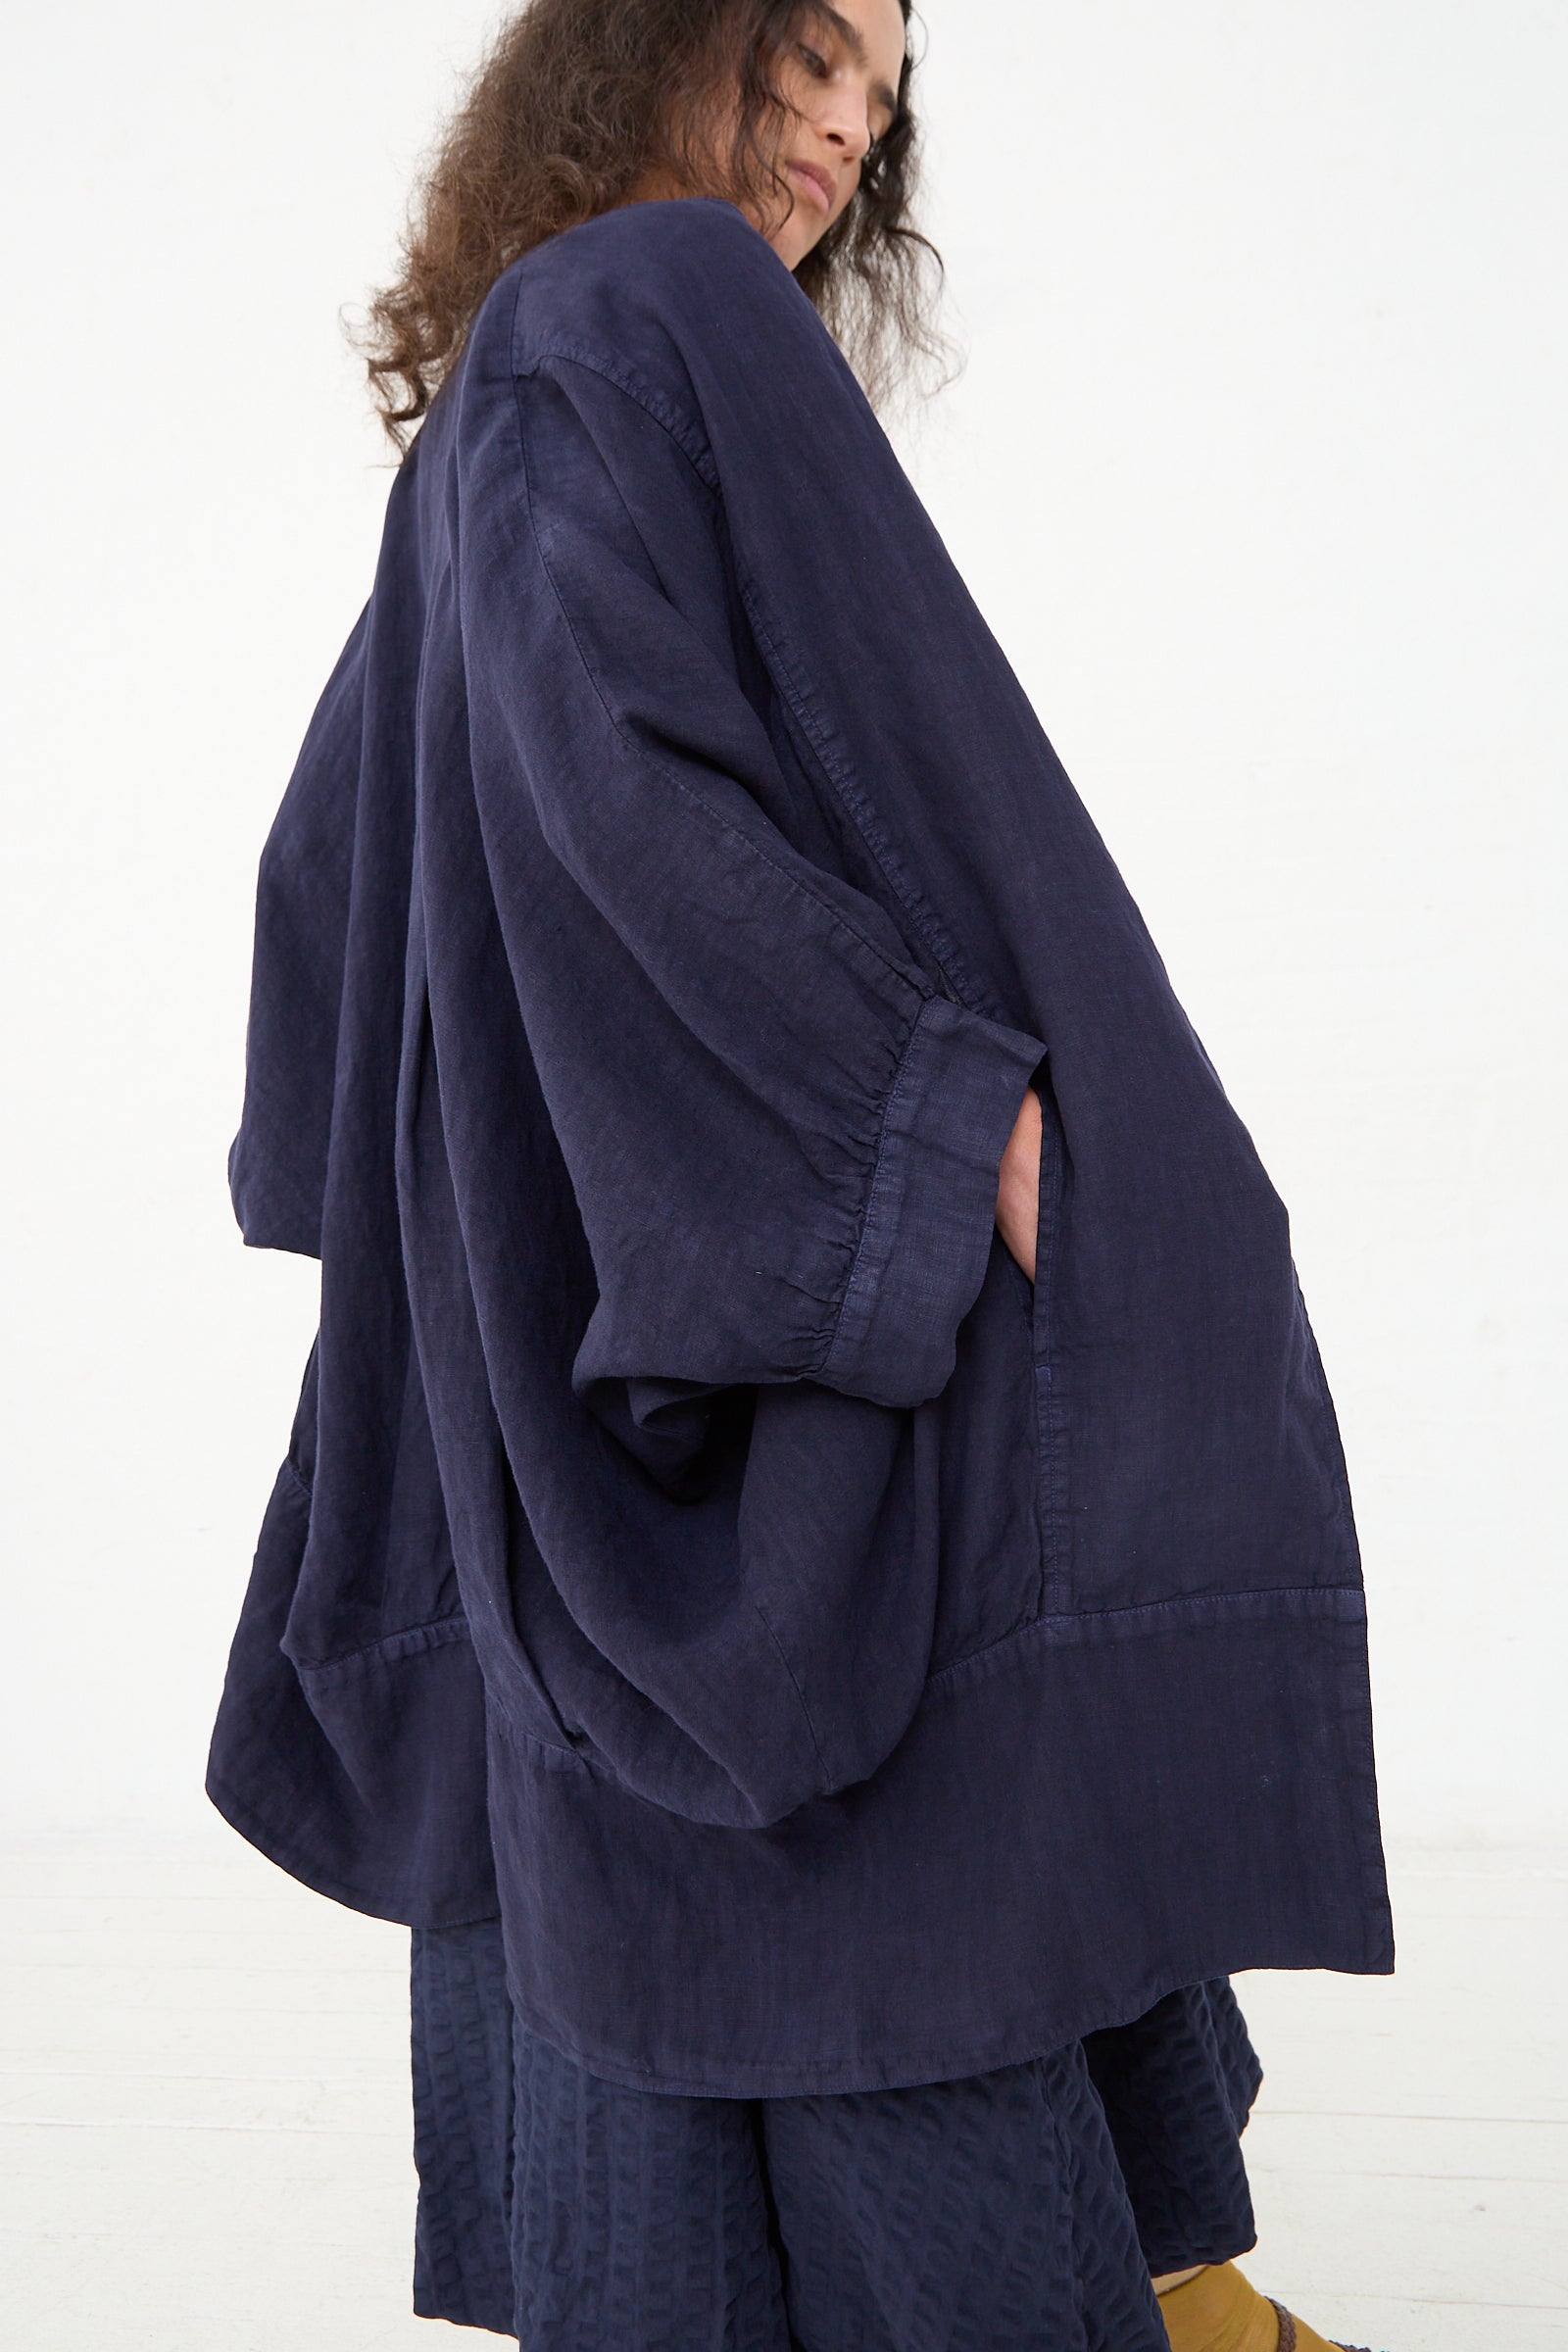 A person standing sideways in Los Angeles, wearing an oversized Black Crane Linen Spoon Jacket in Indigo with a crinkled texture, with their right hand tucked into a pocket.